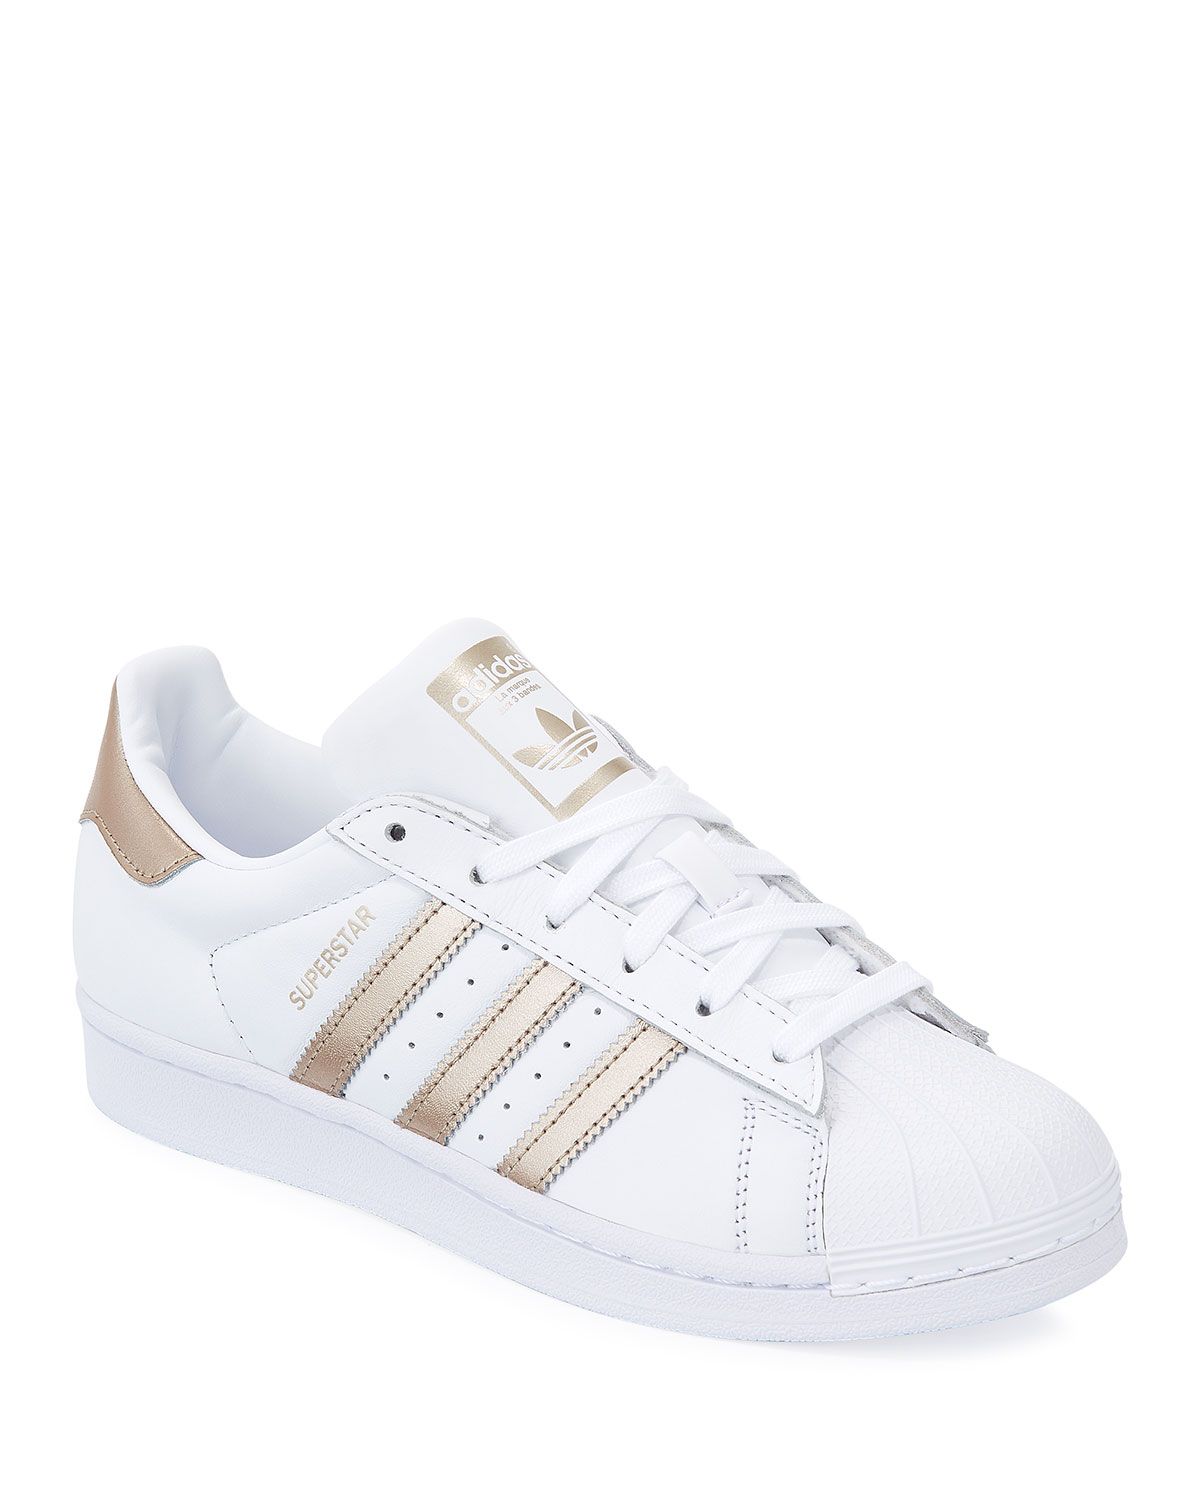 Superstar Lace-Up 3-Stripes & #174 Sneakers | Neiman Marcus